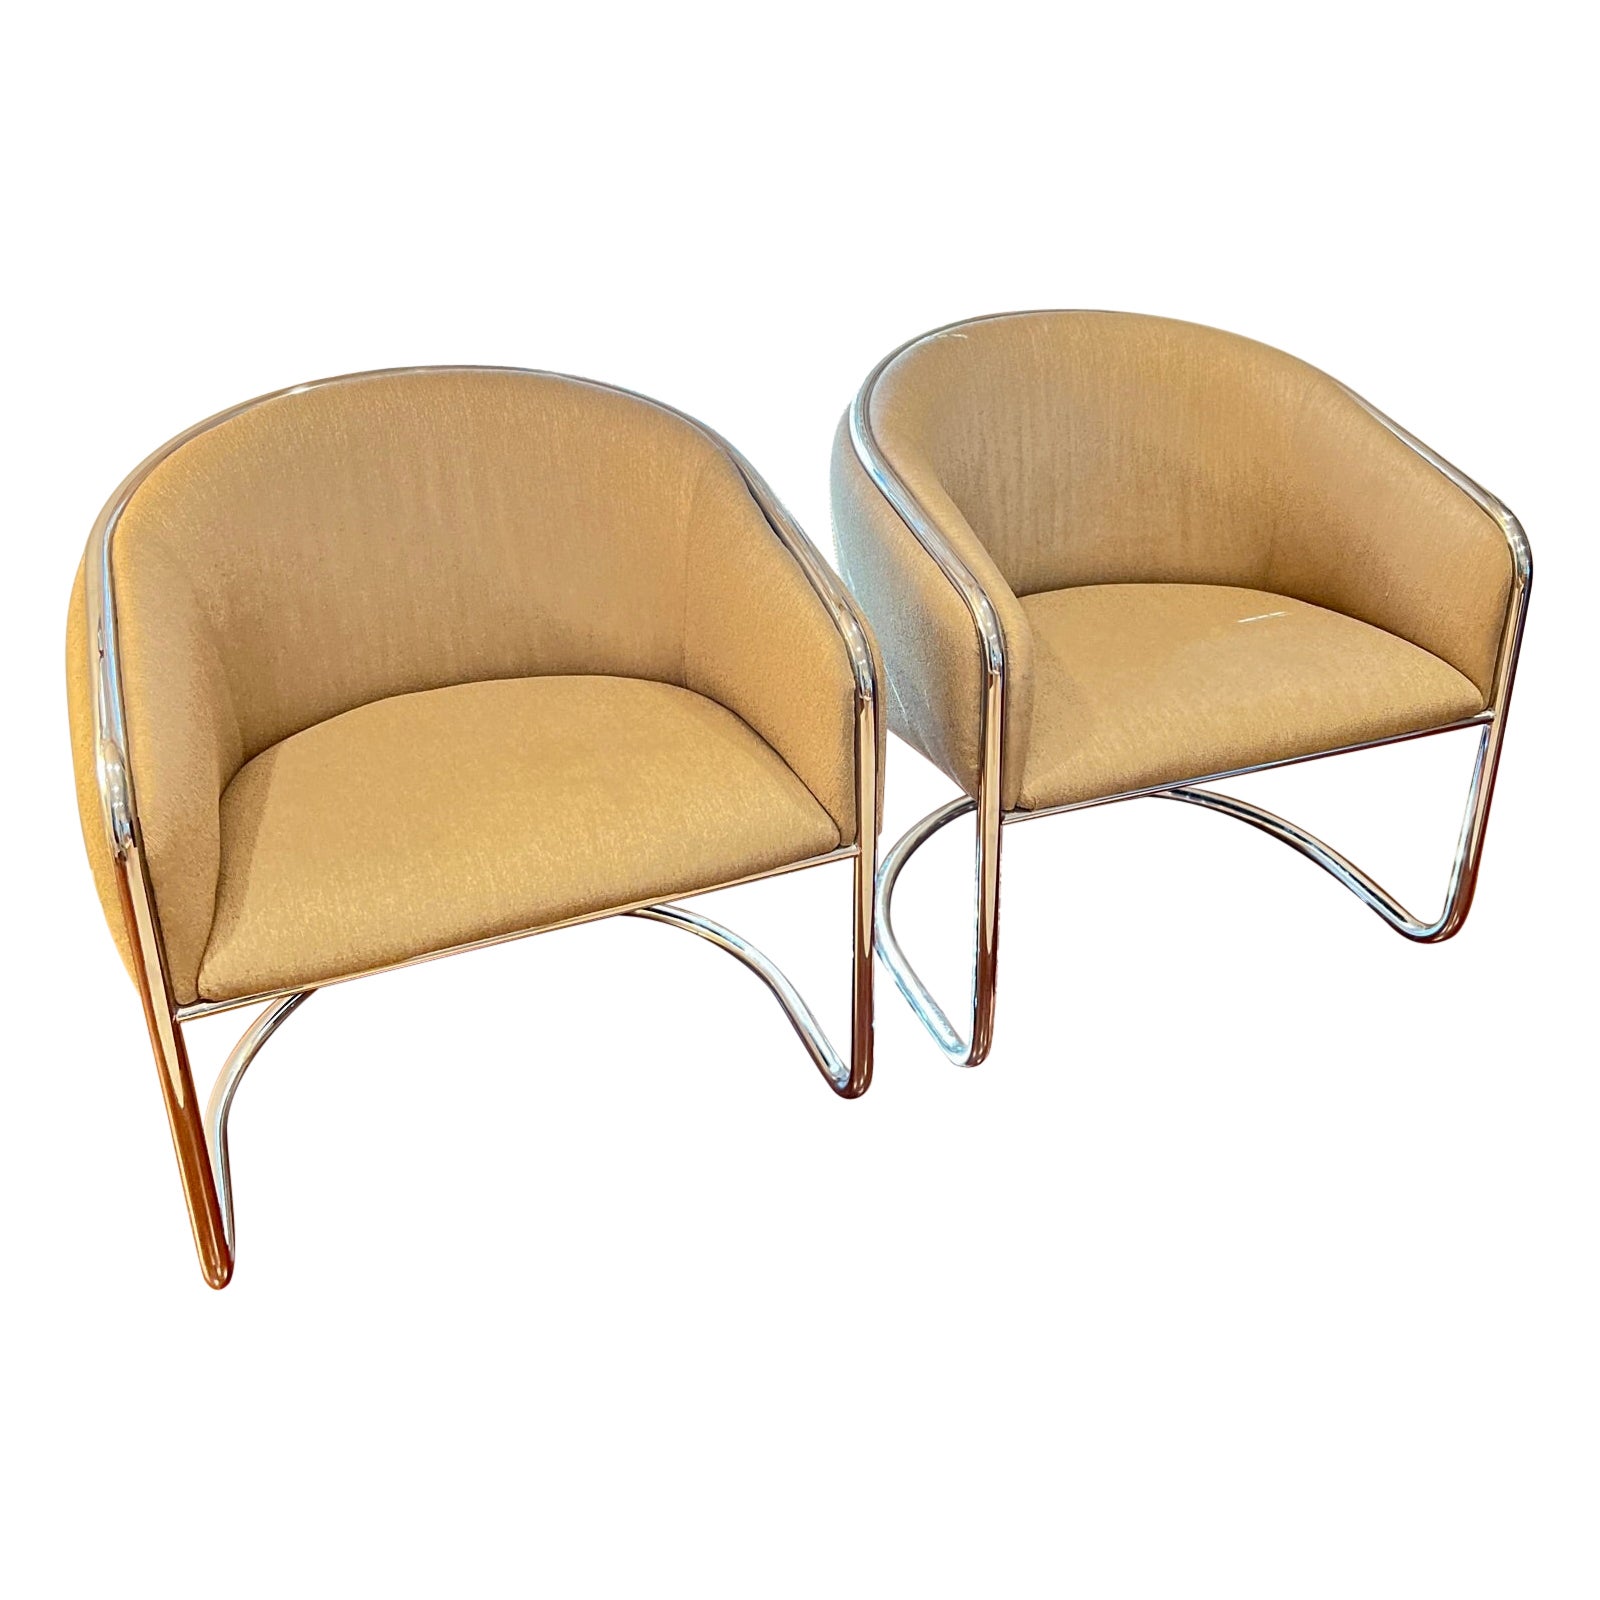 Pair of Cantilevered Chrome Barrel Back Club Chairs by Anton Lorenz for Thonet For Sale